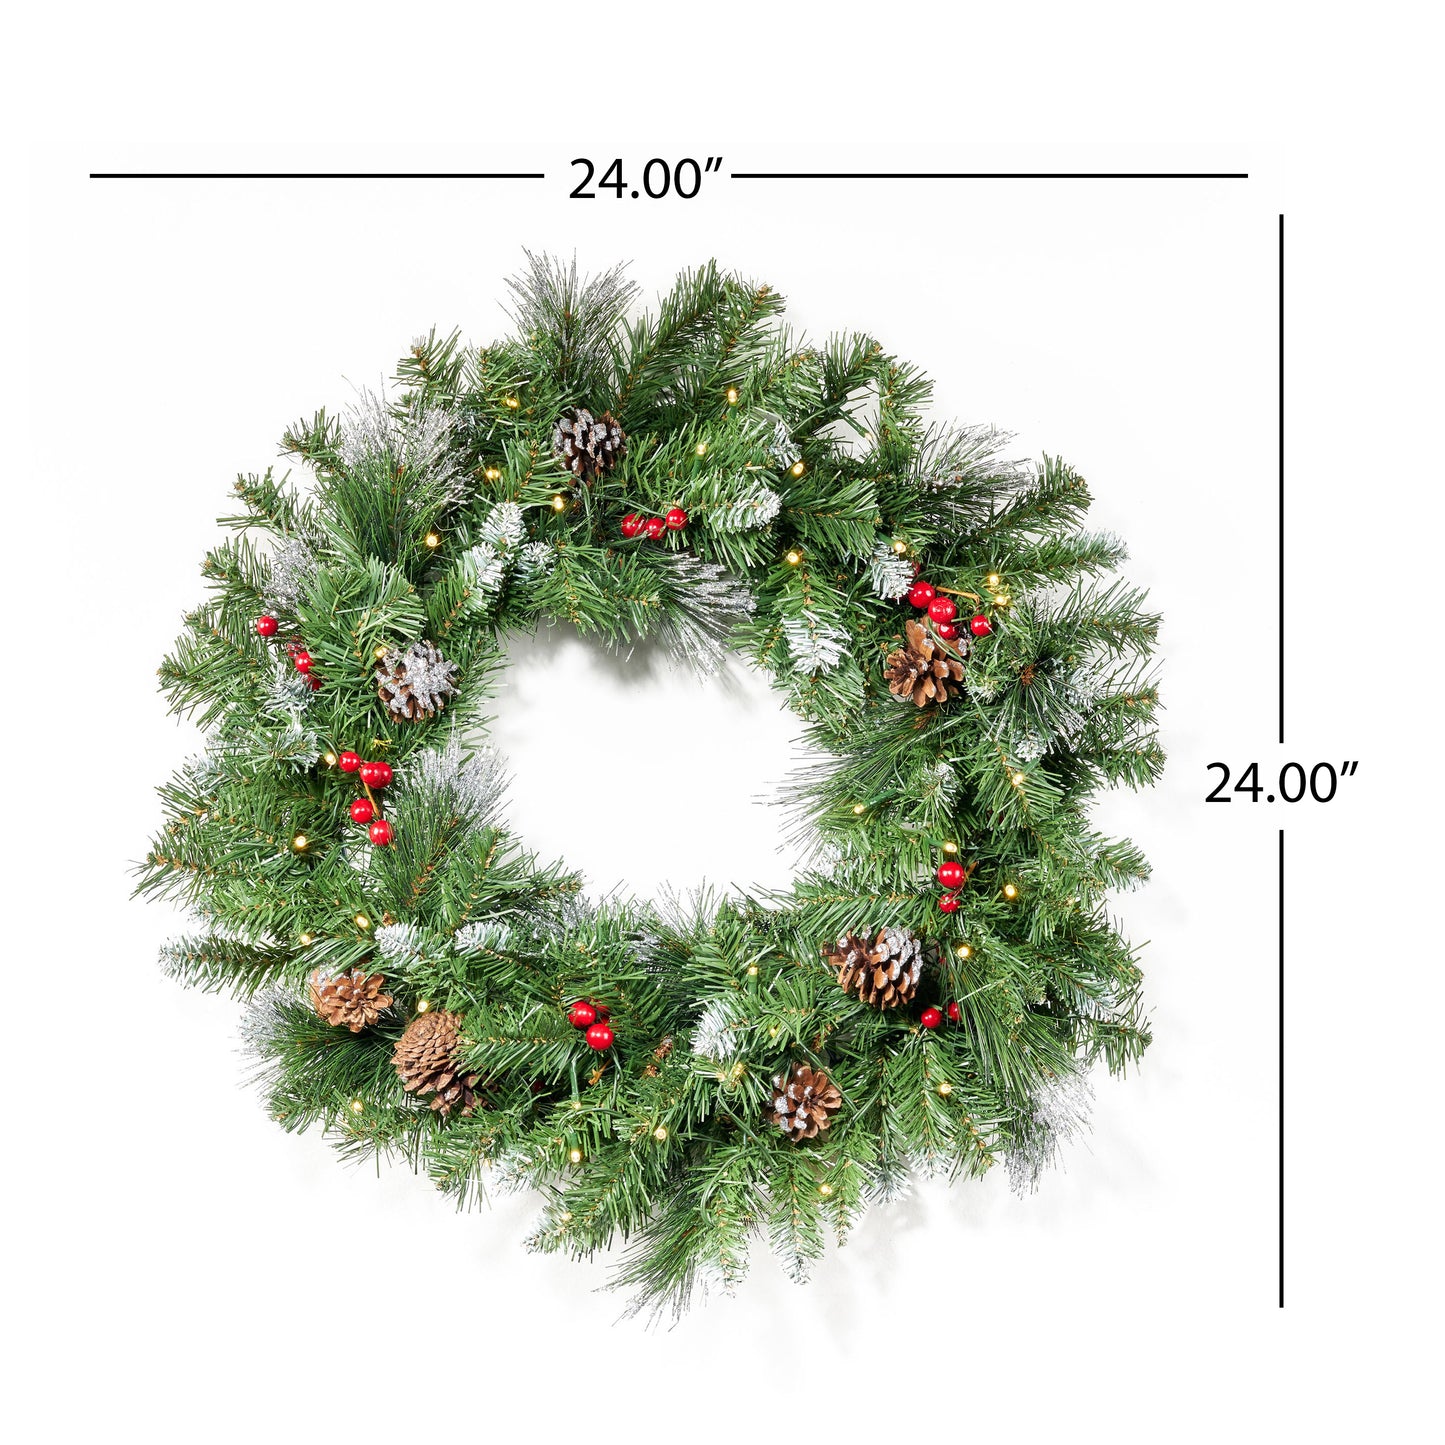 24" Mixed Spruce Warm White LED Artificial Christmas Wreath with Glitter Branches, Red Berries, Pinecones